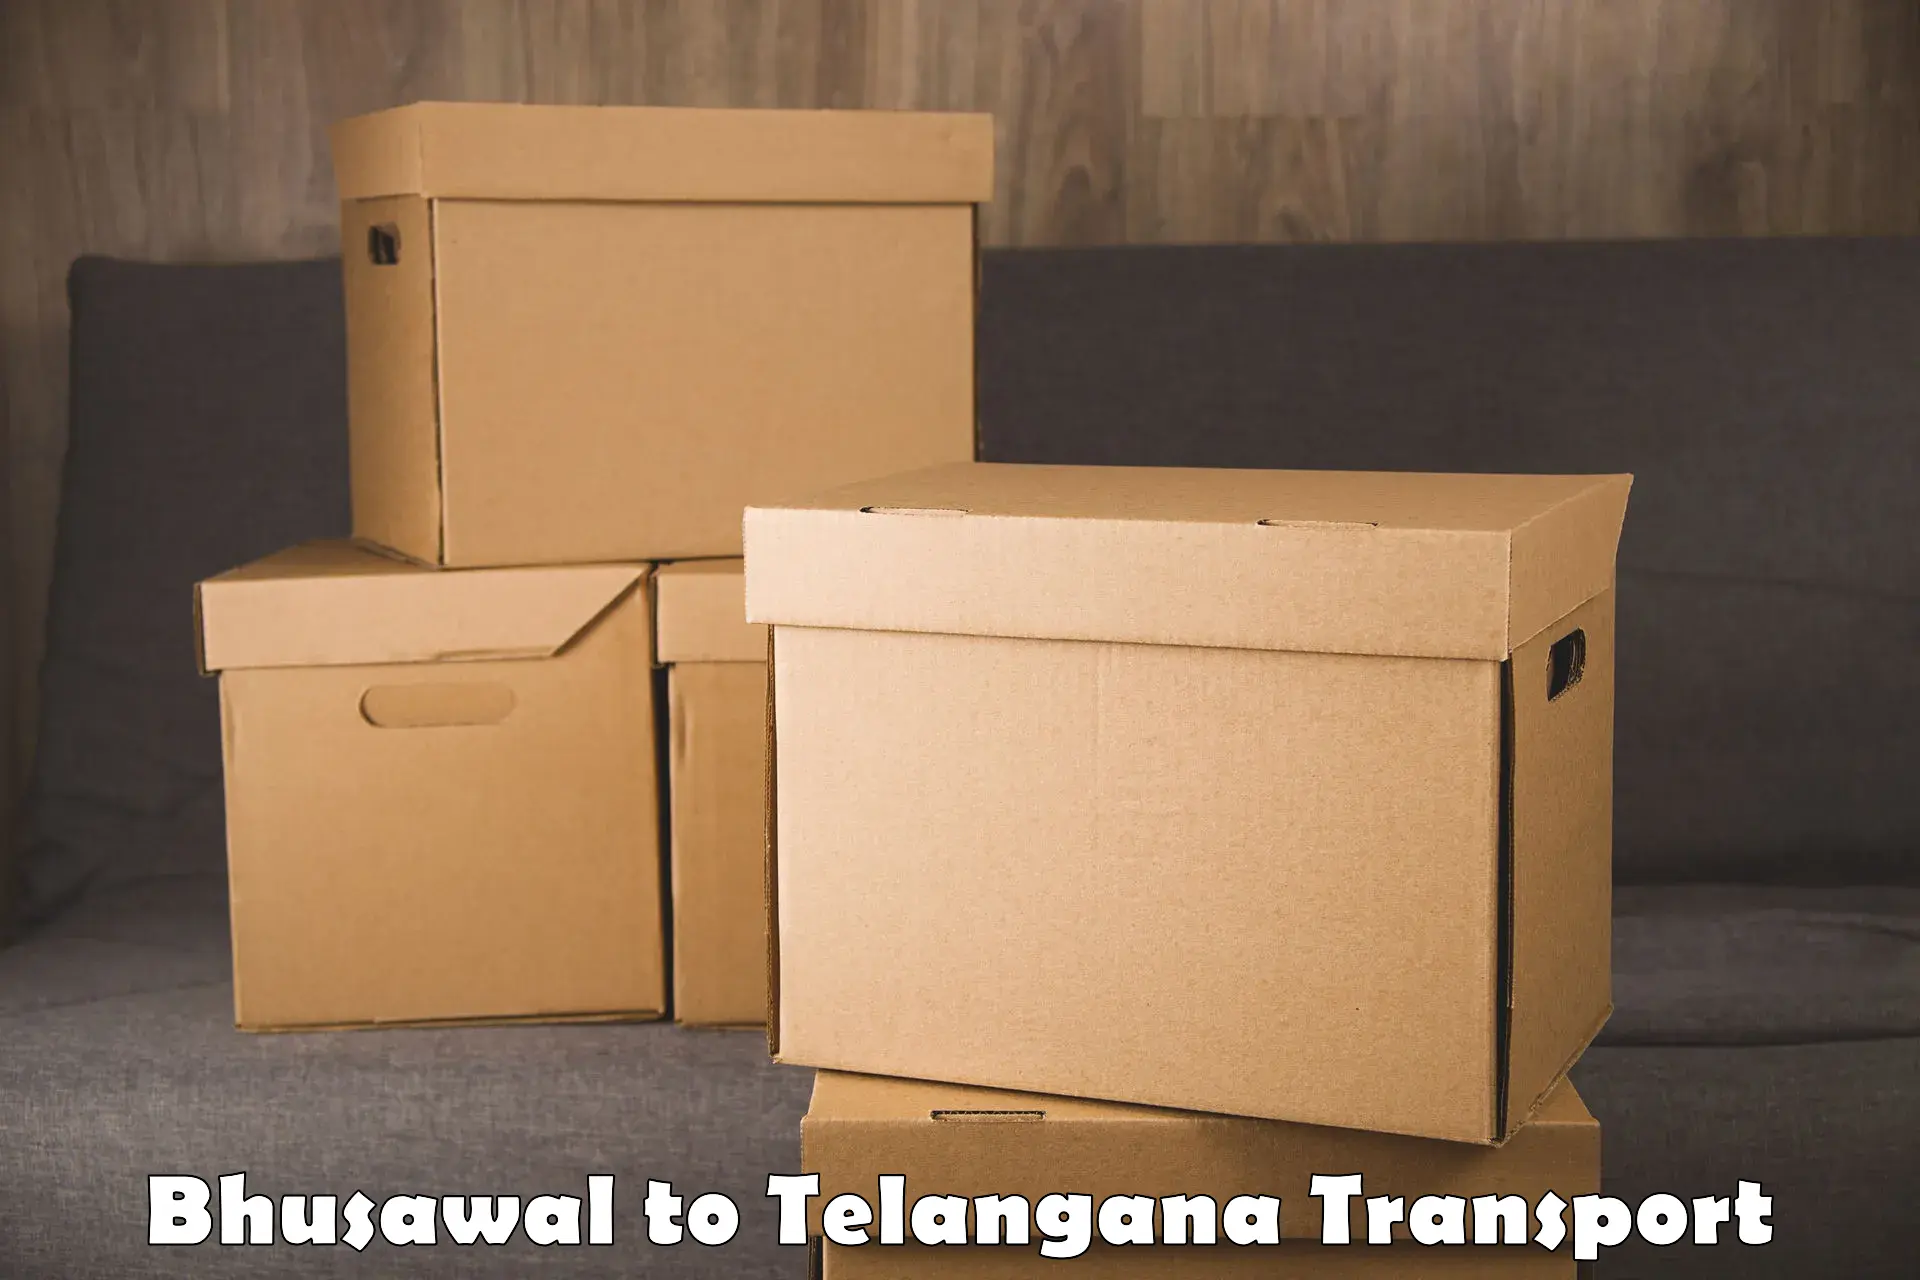 Truck transport companies in India Bhusawal to Eligedu